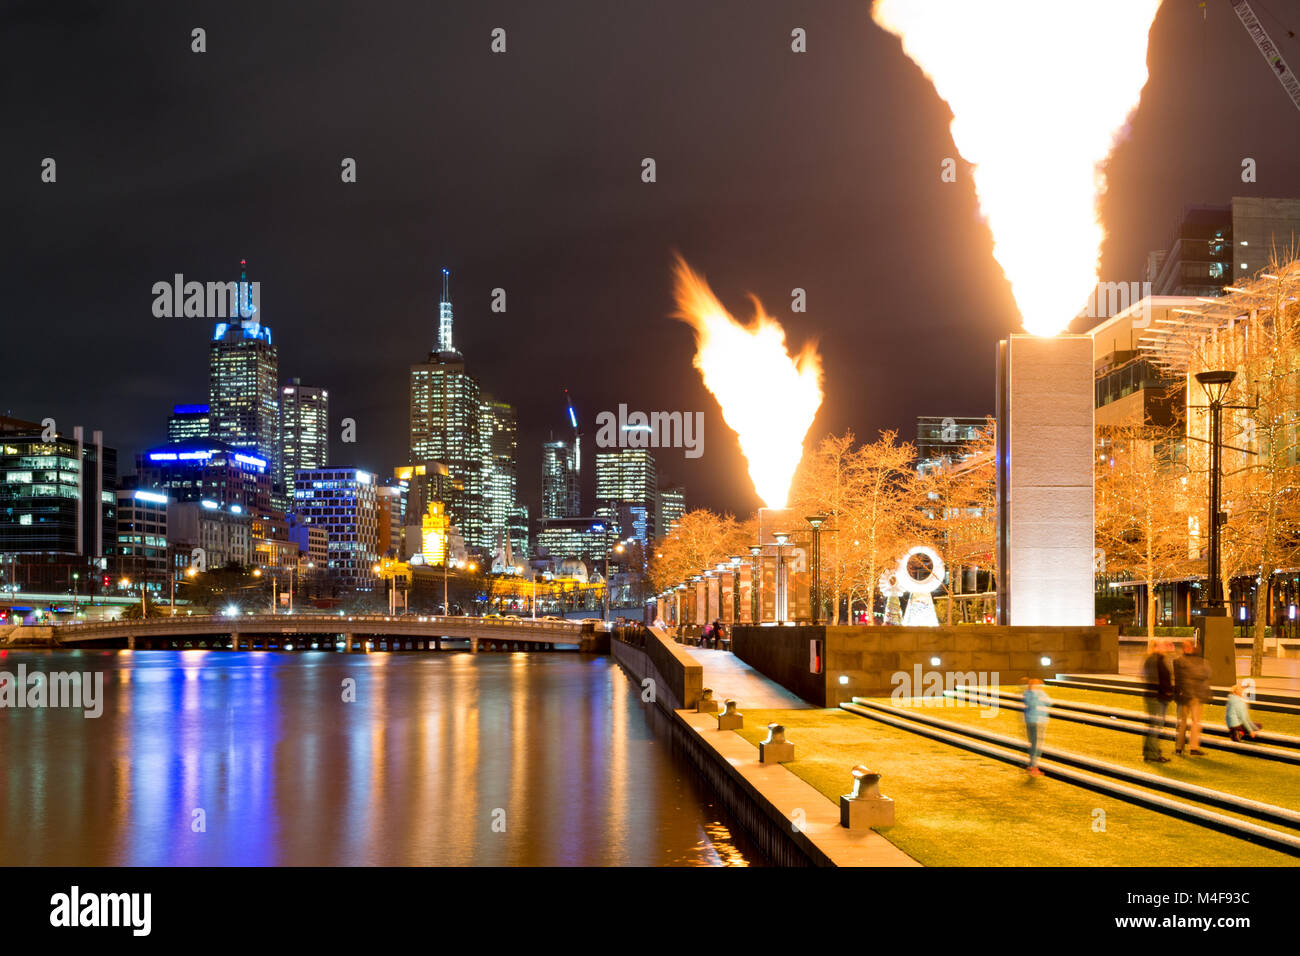 By the Yarra river in Melbourne at night Stock Photo